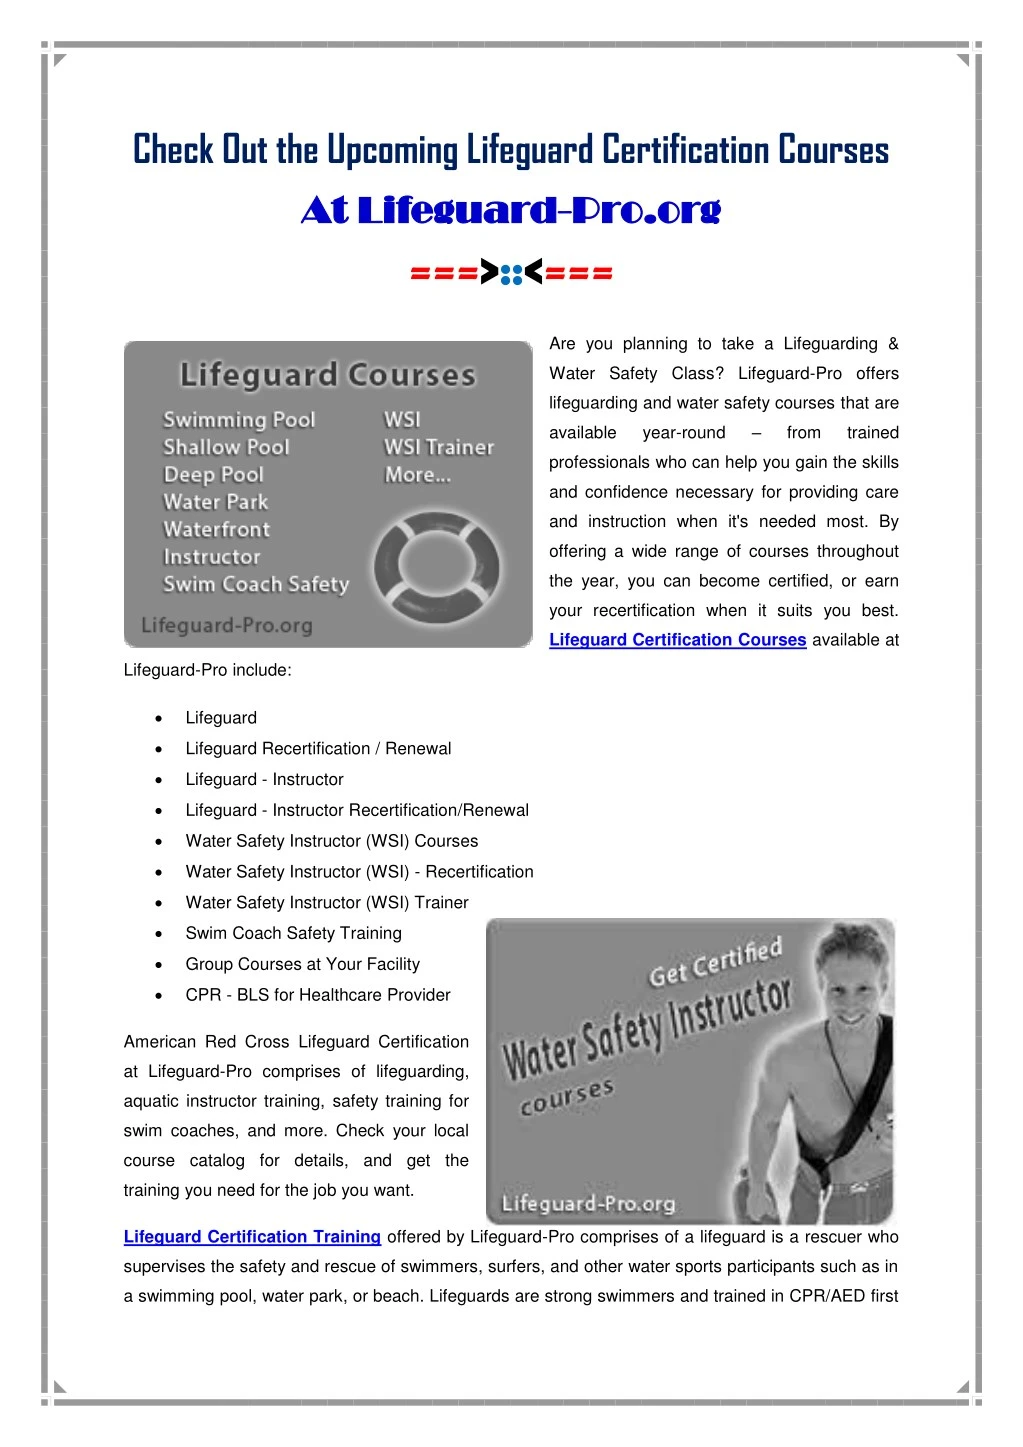 PPT Lifeguard Certification Courses At Lifeguard Pro org PowerPoint